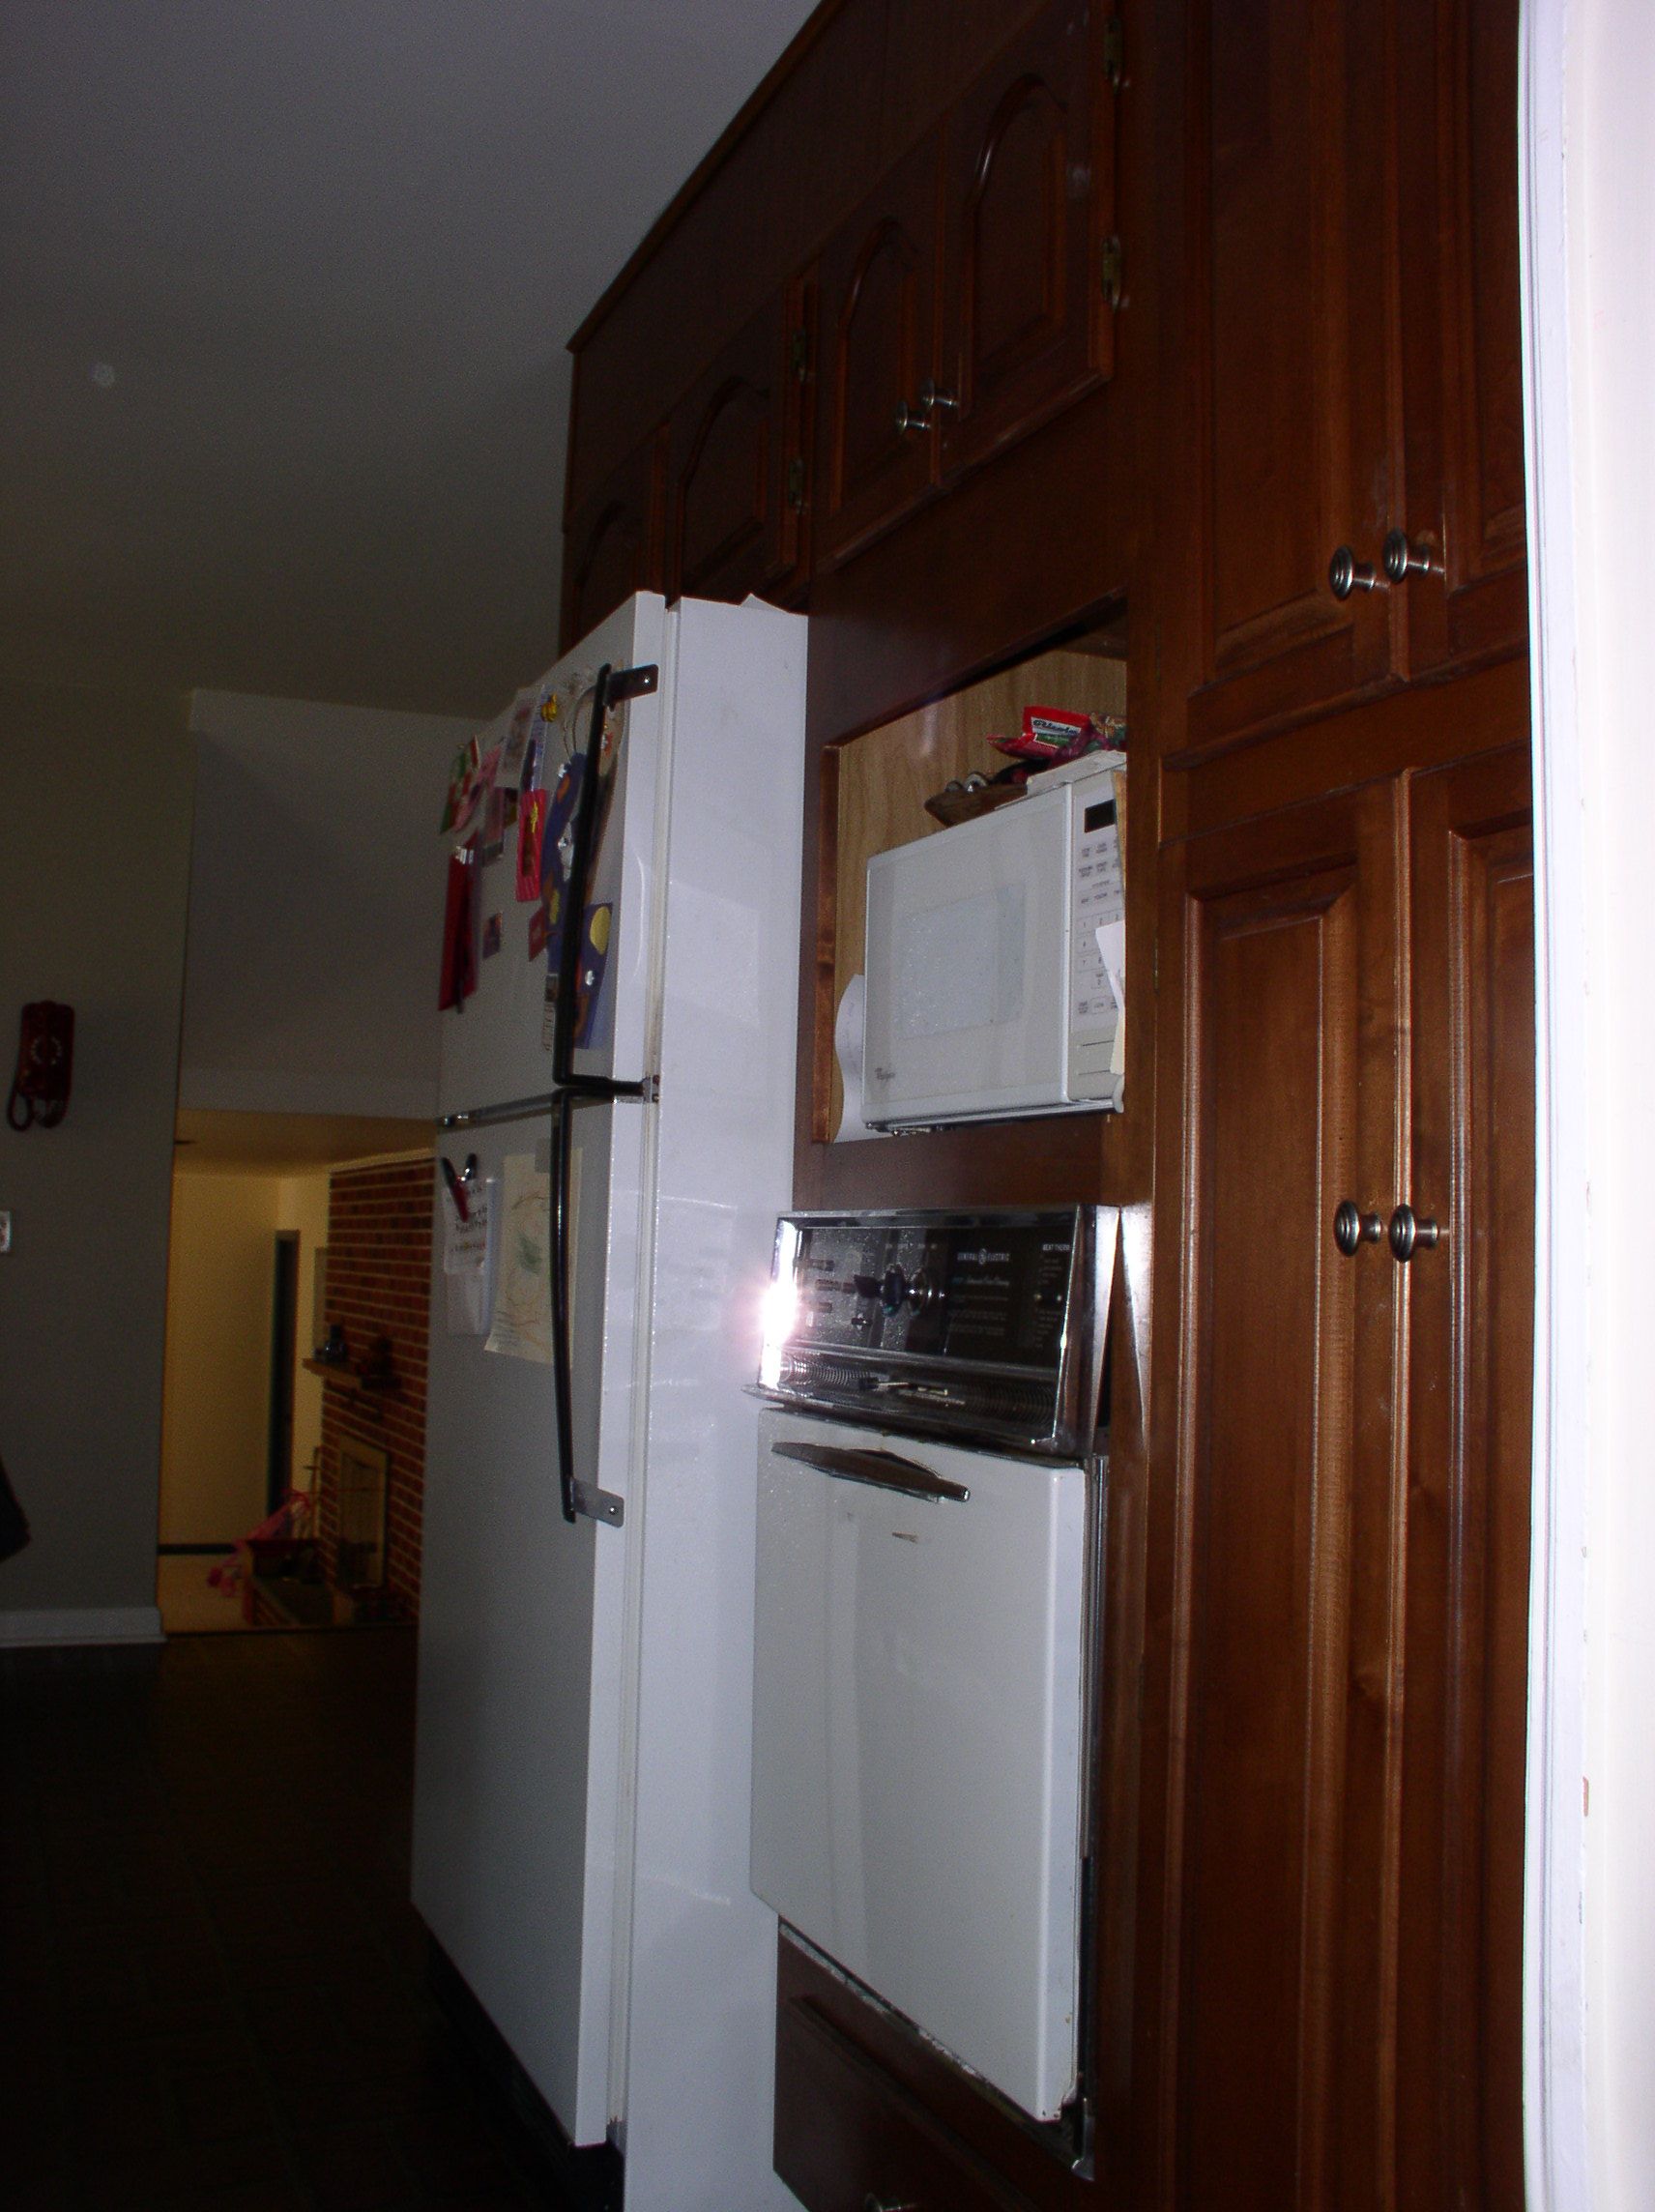 looking at fridge sticking out from wall cabinets